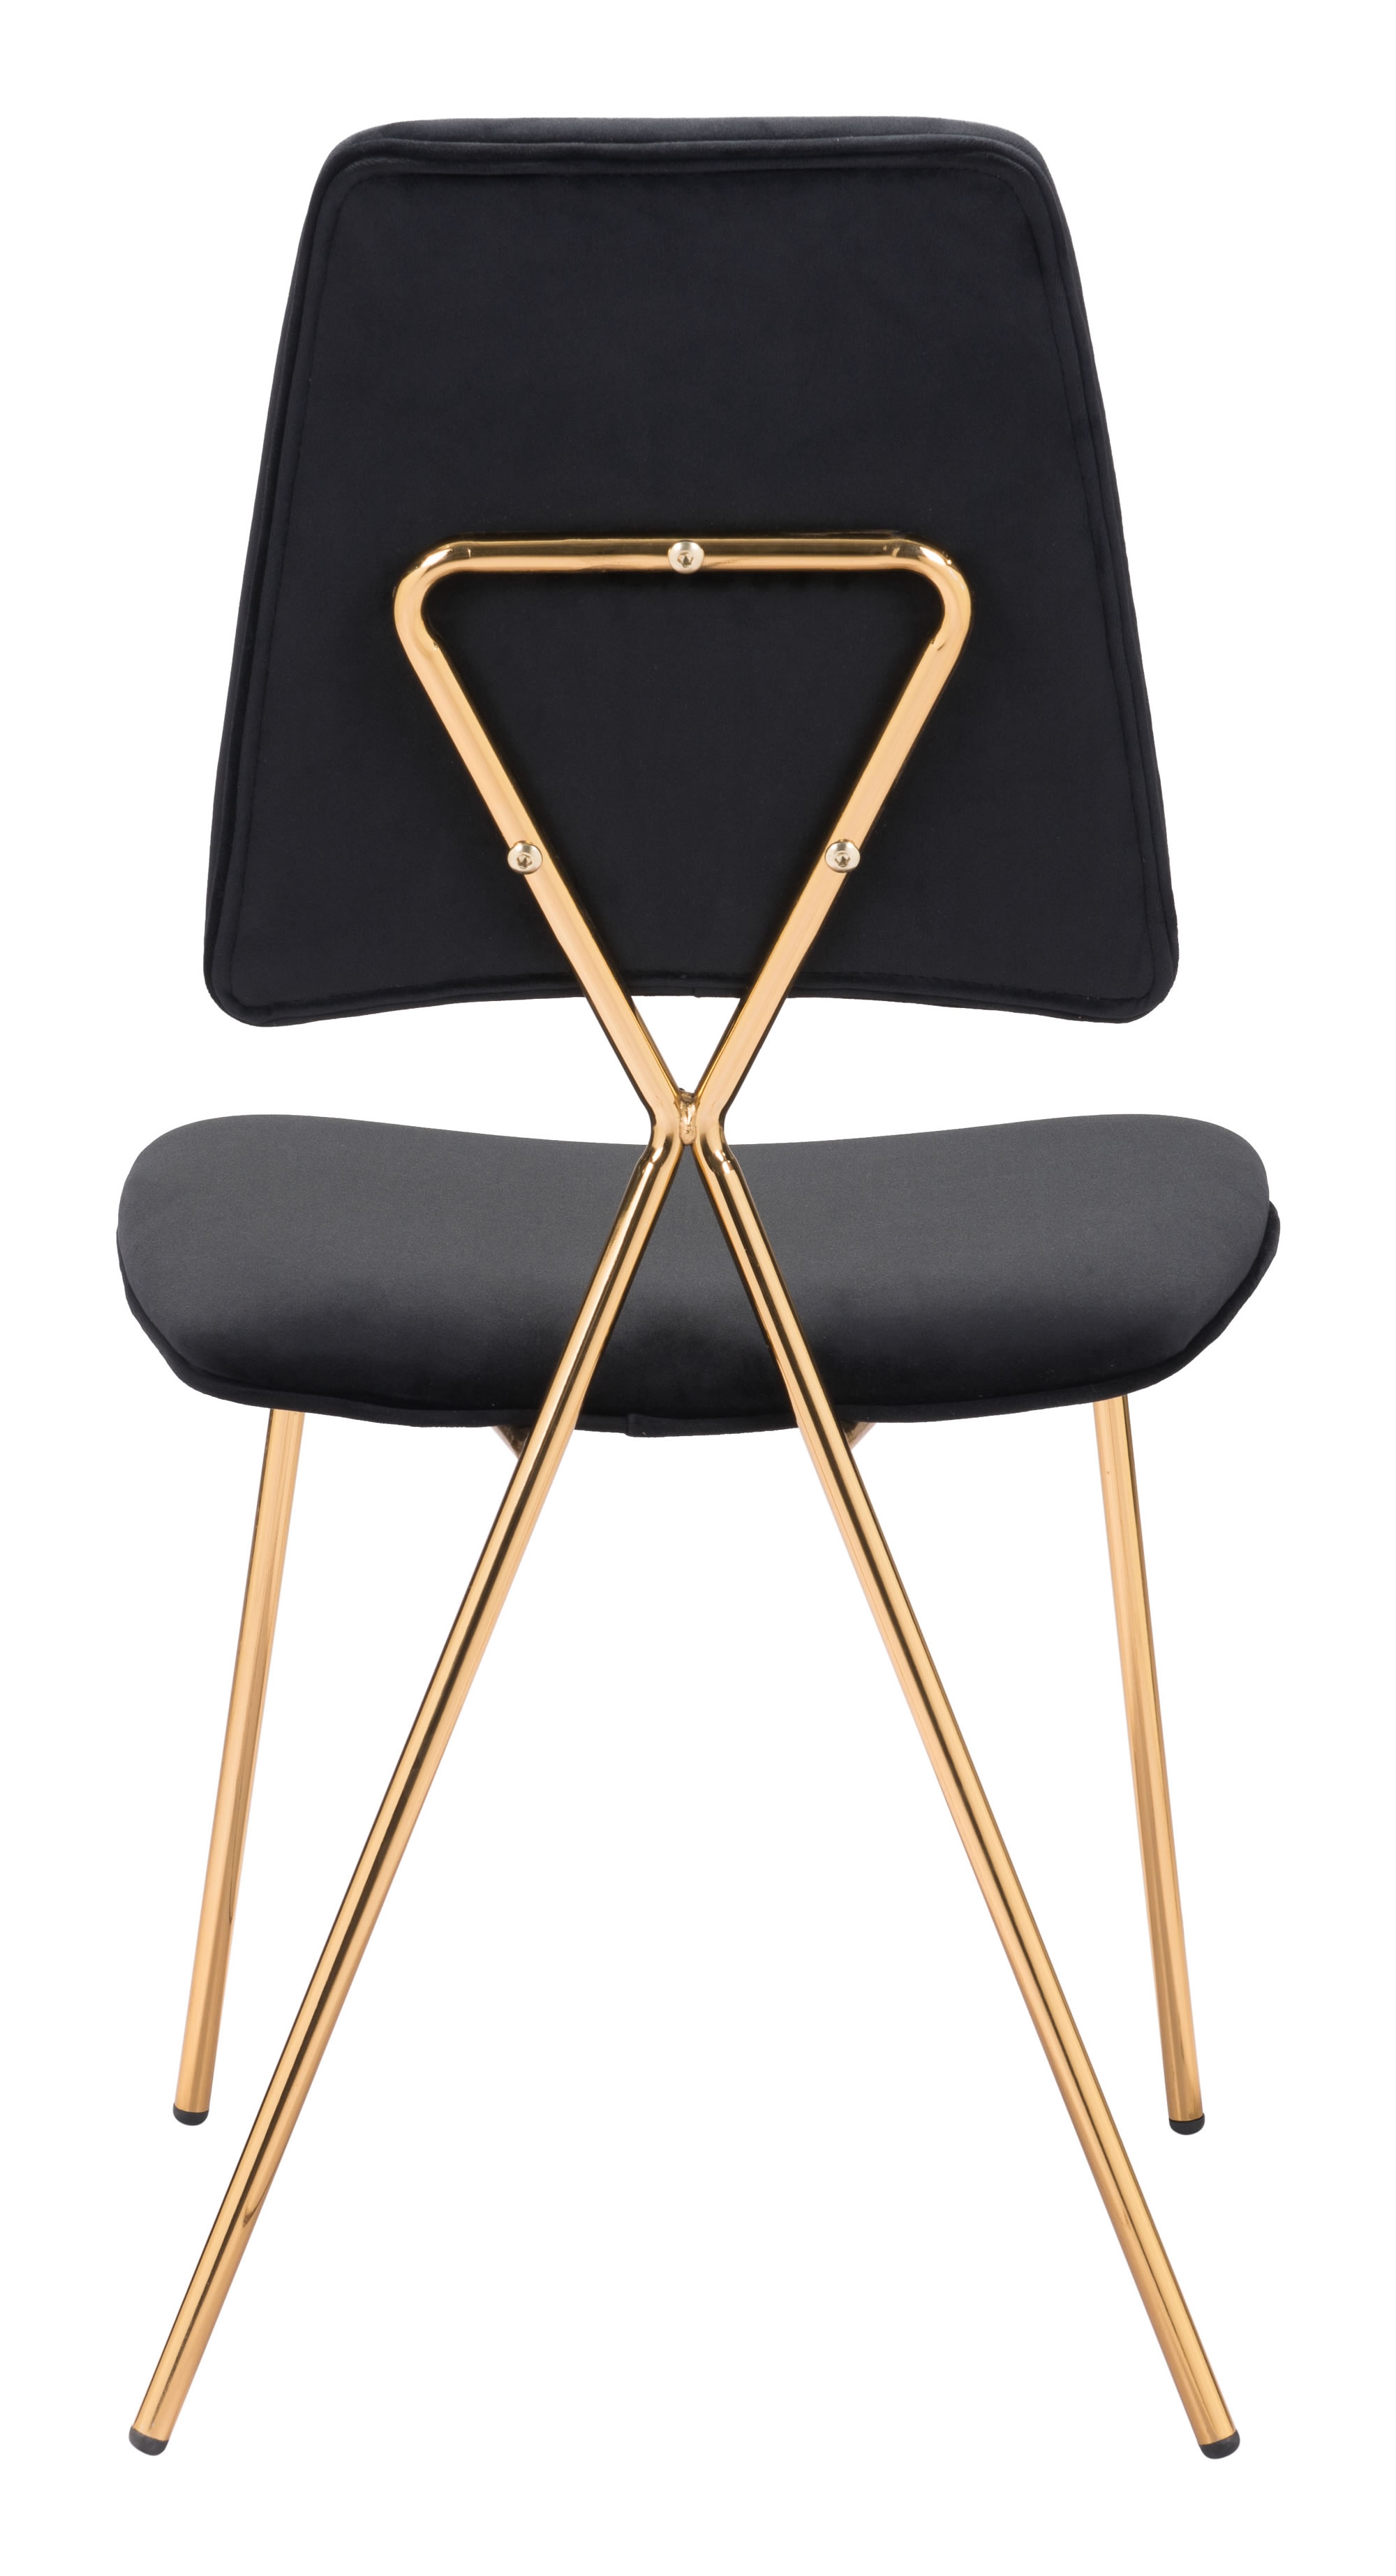 Chloe Dining Chair (Set of 2) Black & Gold - Image 3